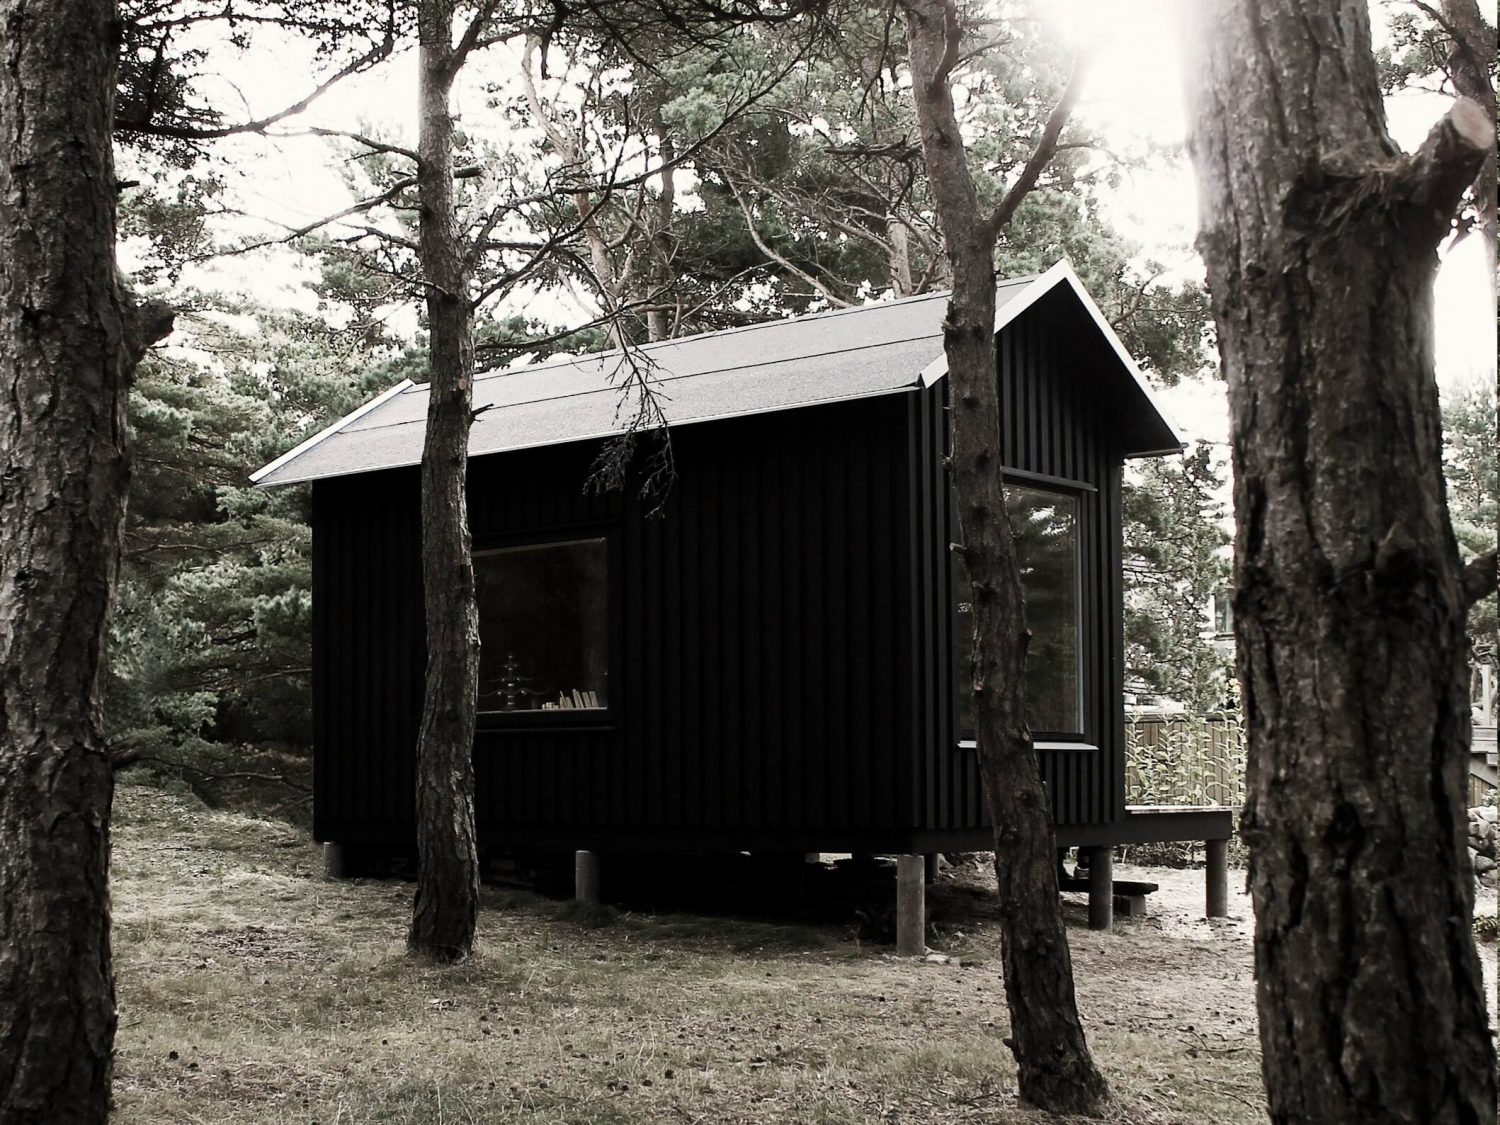 Ermitage Cabin by Septembre